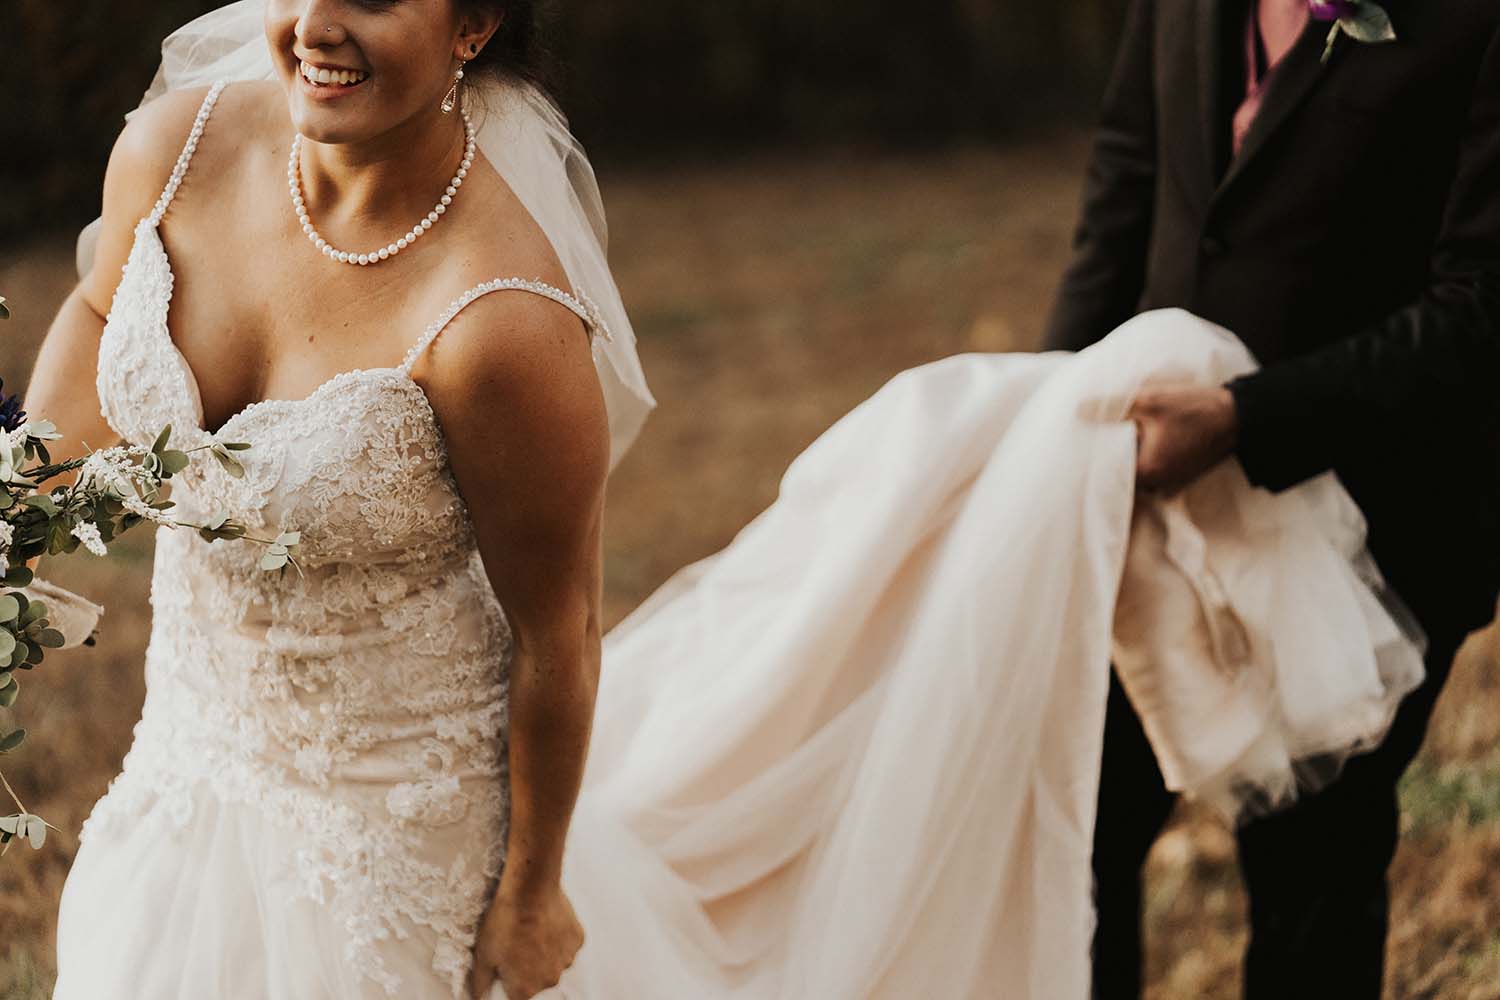 How to Choose the Right Wedding Dress